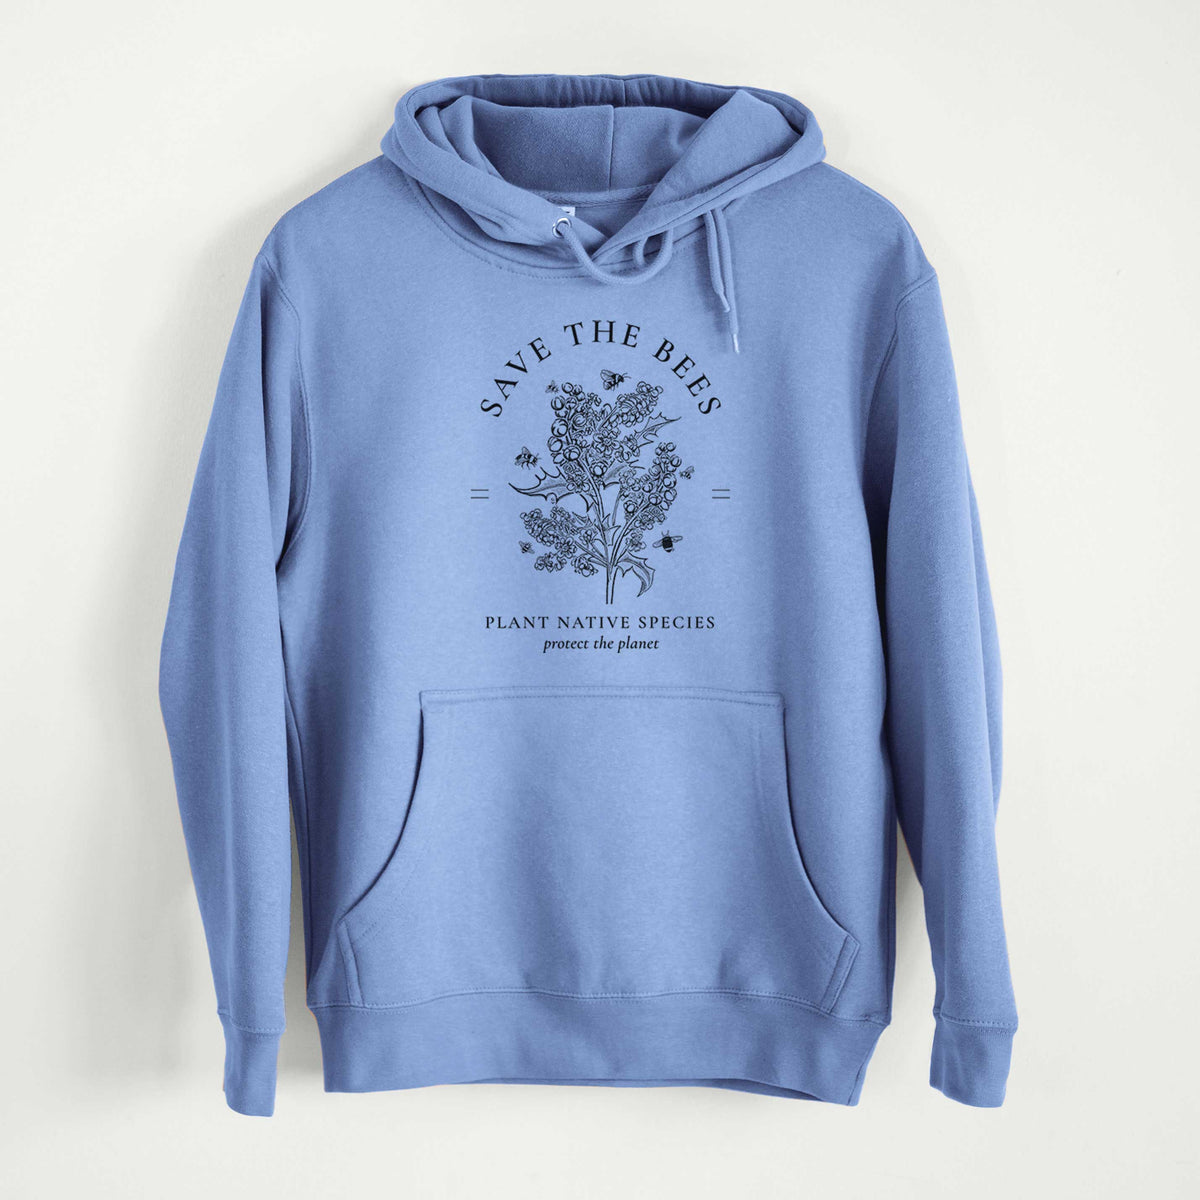 Save the Bees - Plant Native Species  - Mid-Weight Unisex Premium Blend Hoodie